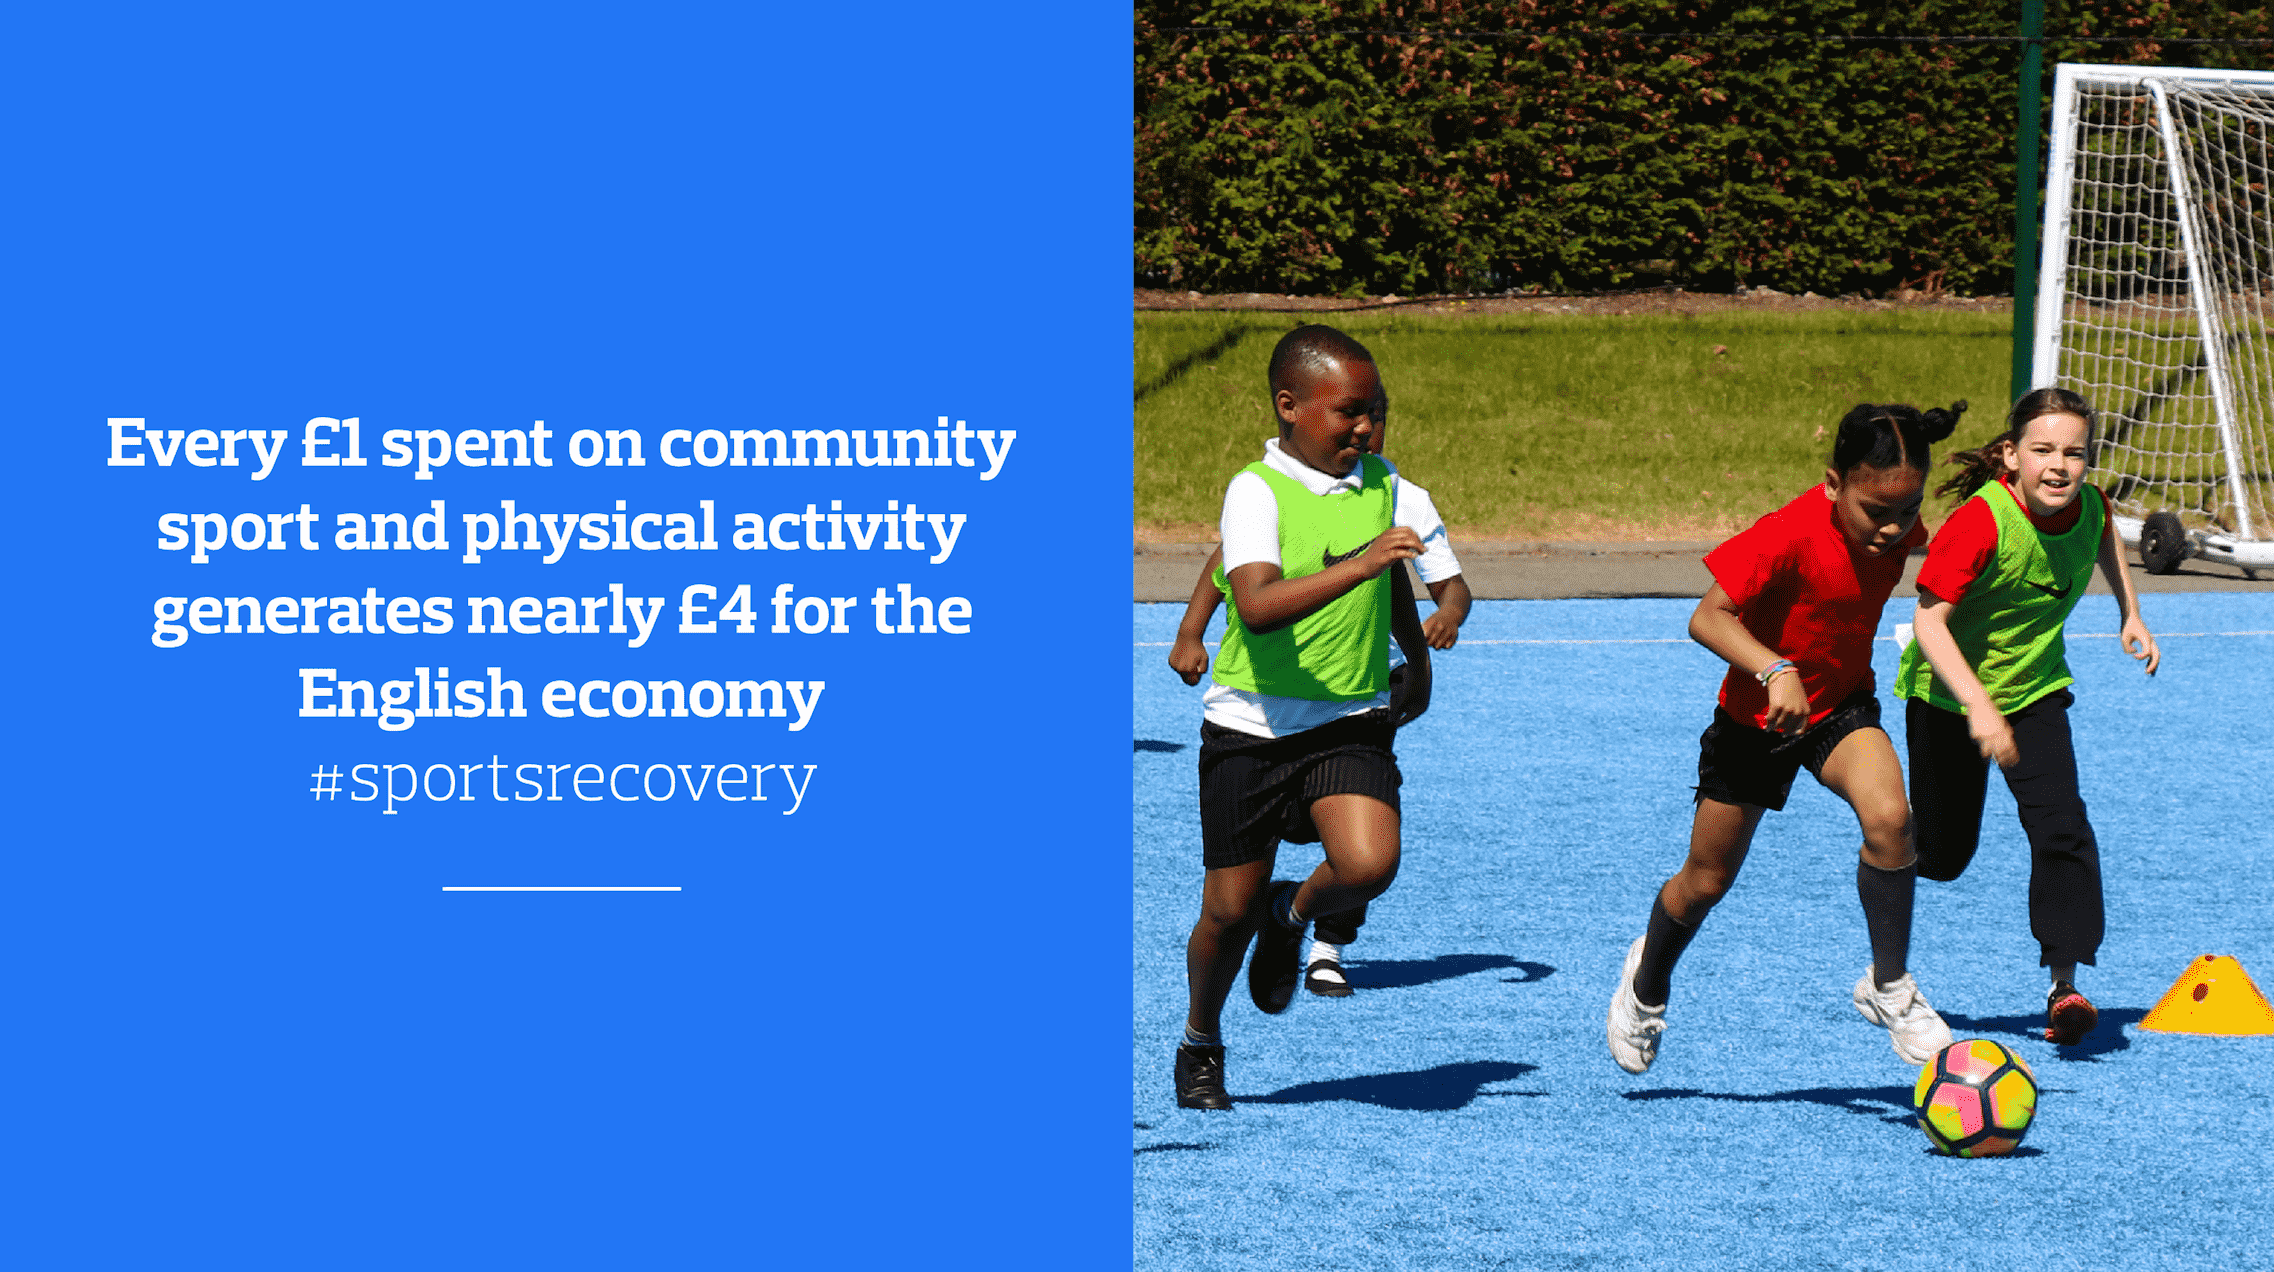 children playing hockey- strapline every £1 spent on community sport and physical activity generates nearly £4 for the English economy